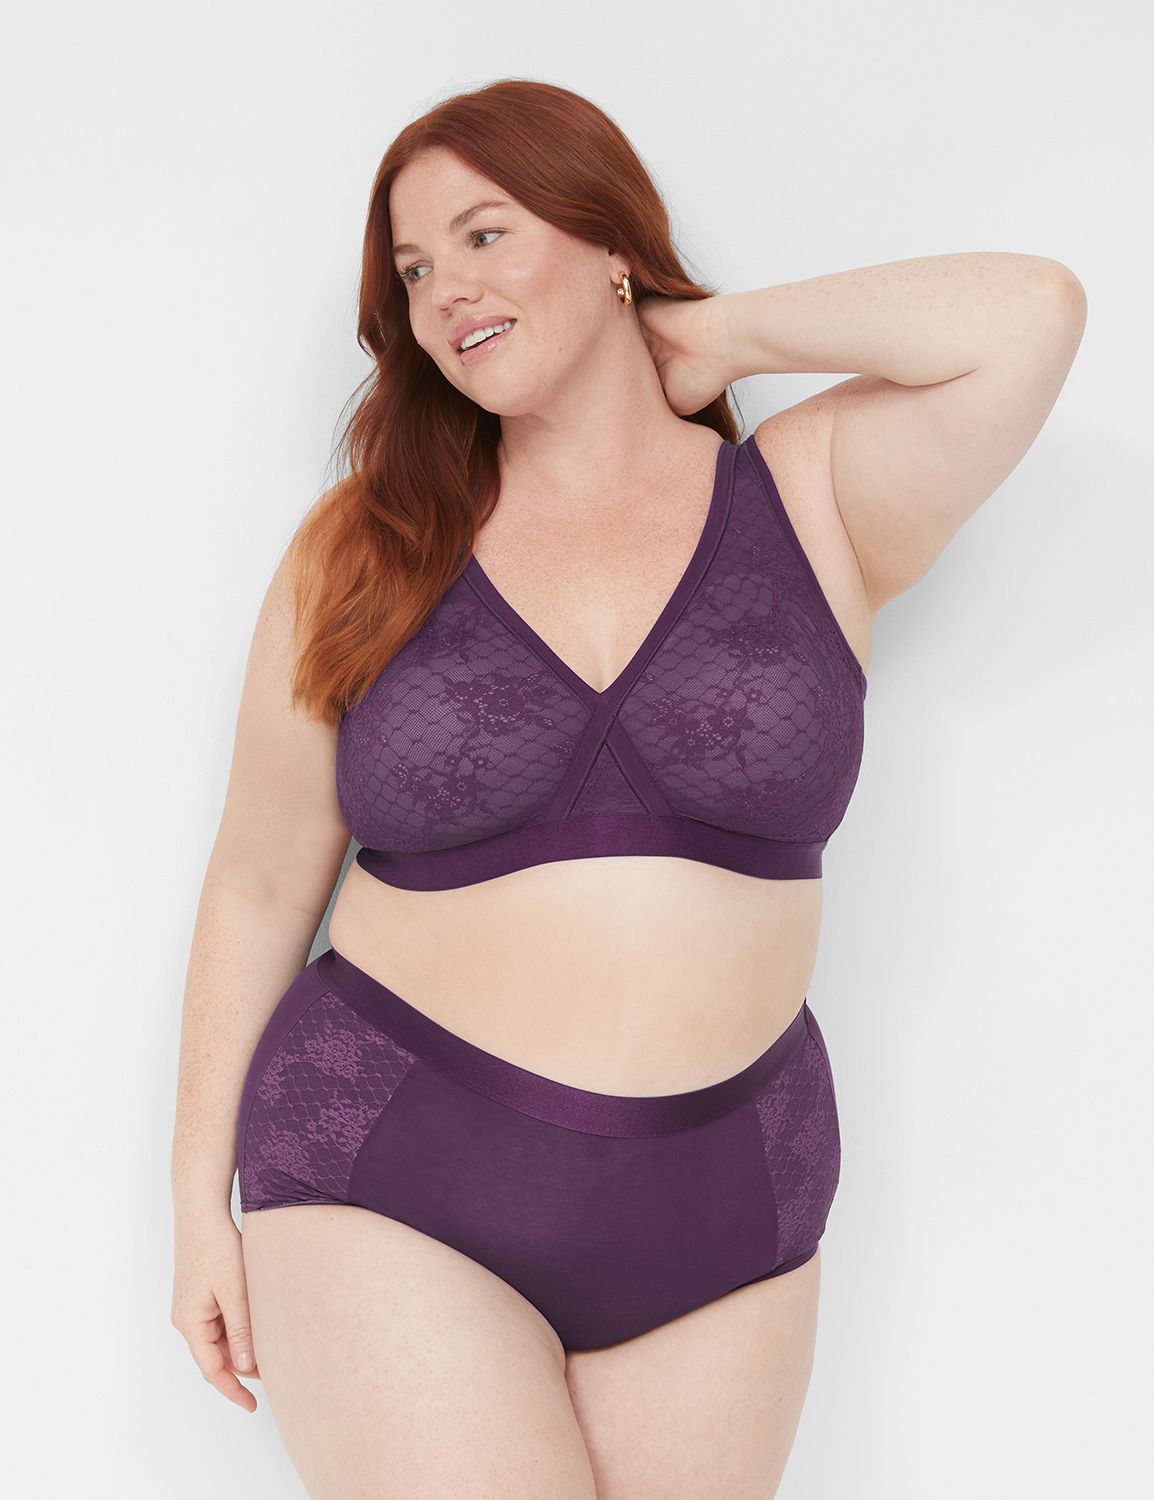 Panty Sale at @lanebryant!!⁣ 10 Panties for $35 ⁣ *** CLICK THE LINK IN OUR  BIO ***⁣ #PMMDealAlert ⁣ #plussizefashion #plussize #